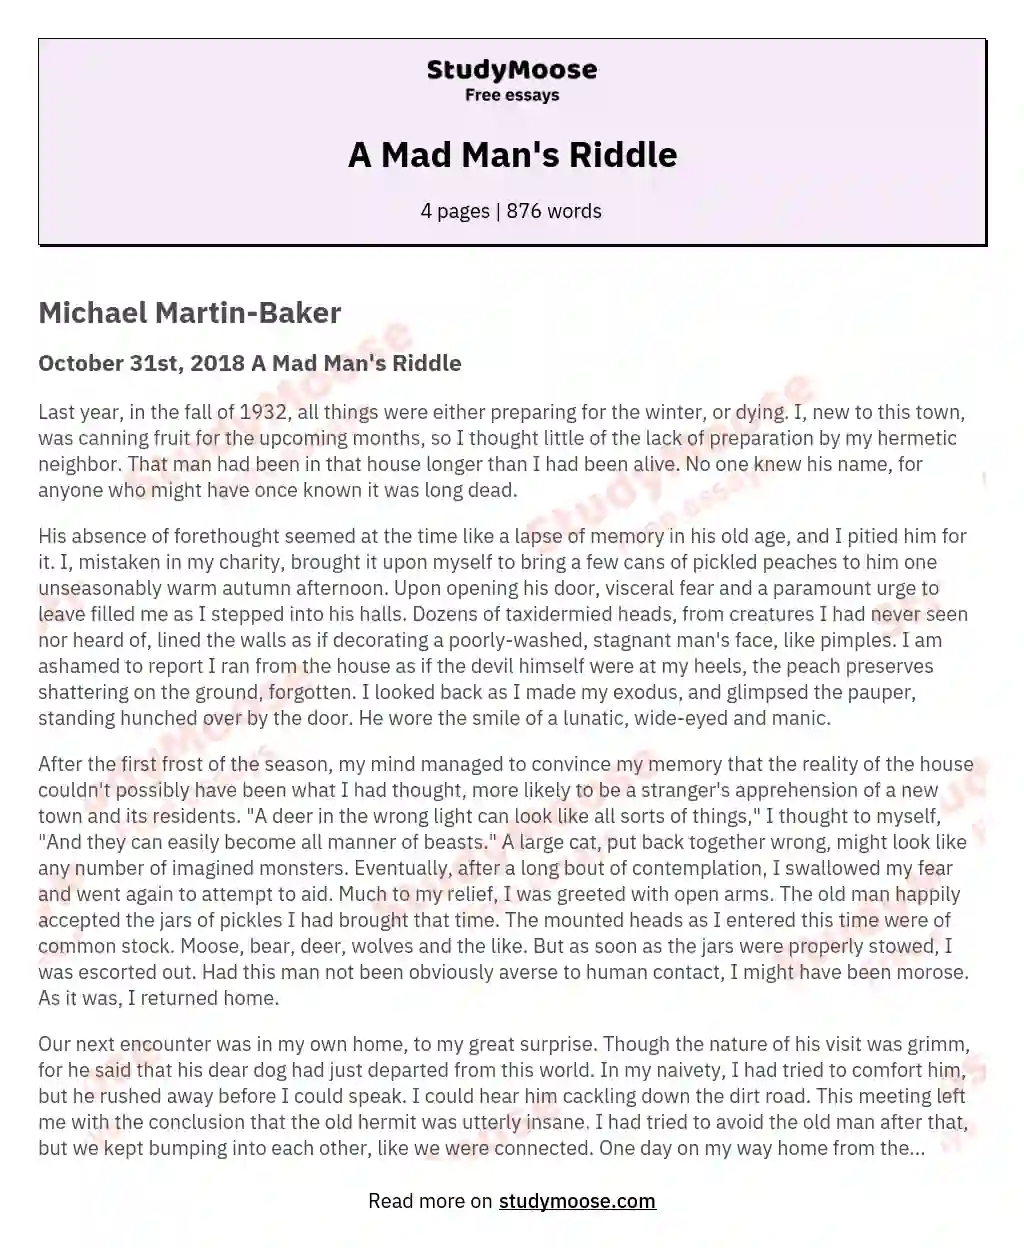 A Mad Man's Riddle essay